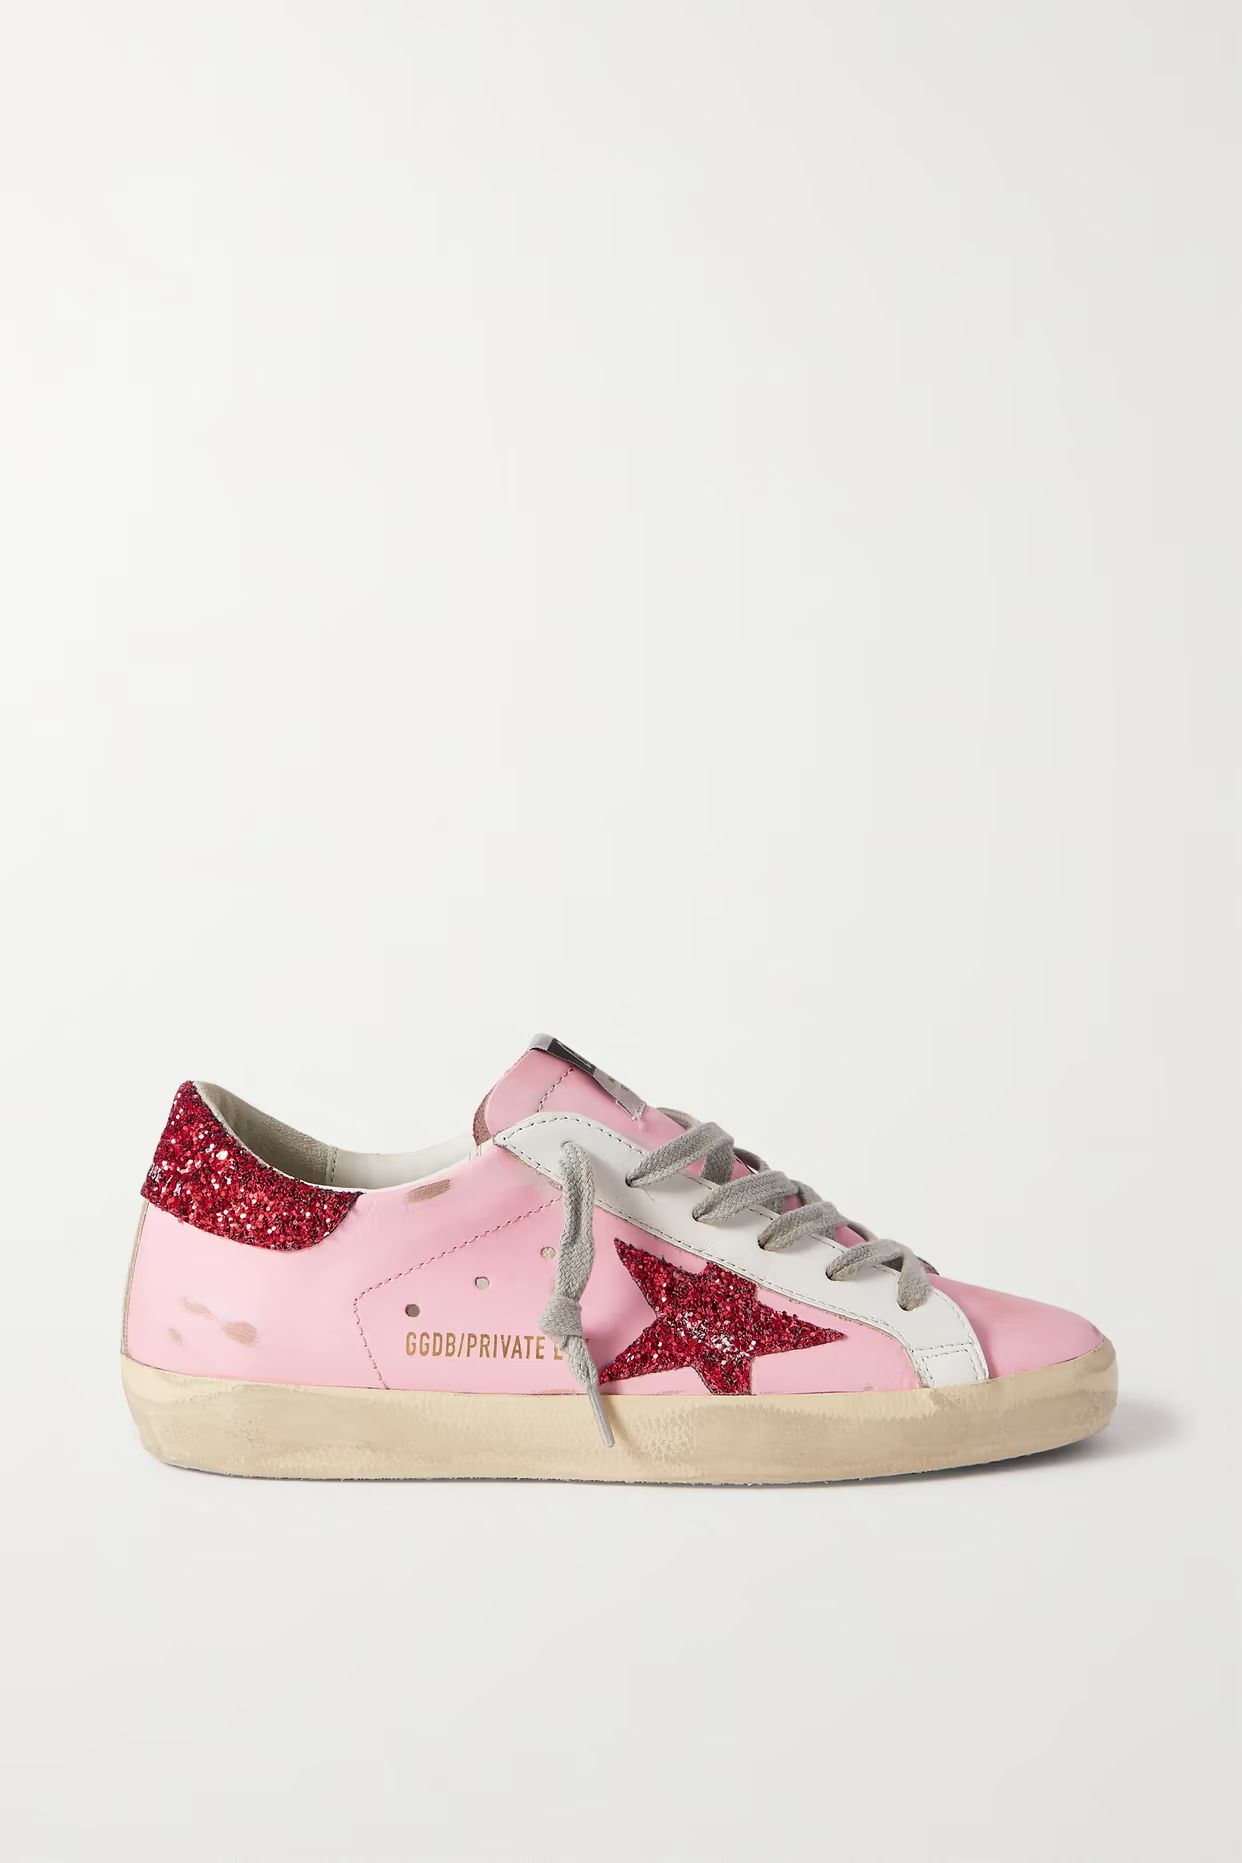 Golden Goose - Superstar Distressed Leather, Suede And Shearling Sneakers - Pink | NET-A-PORTER (US)